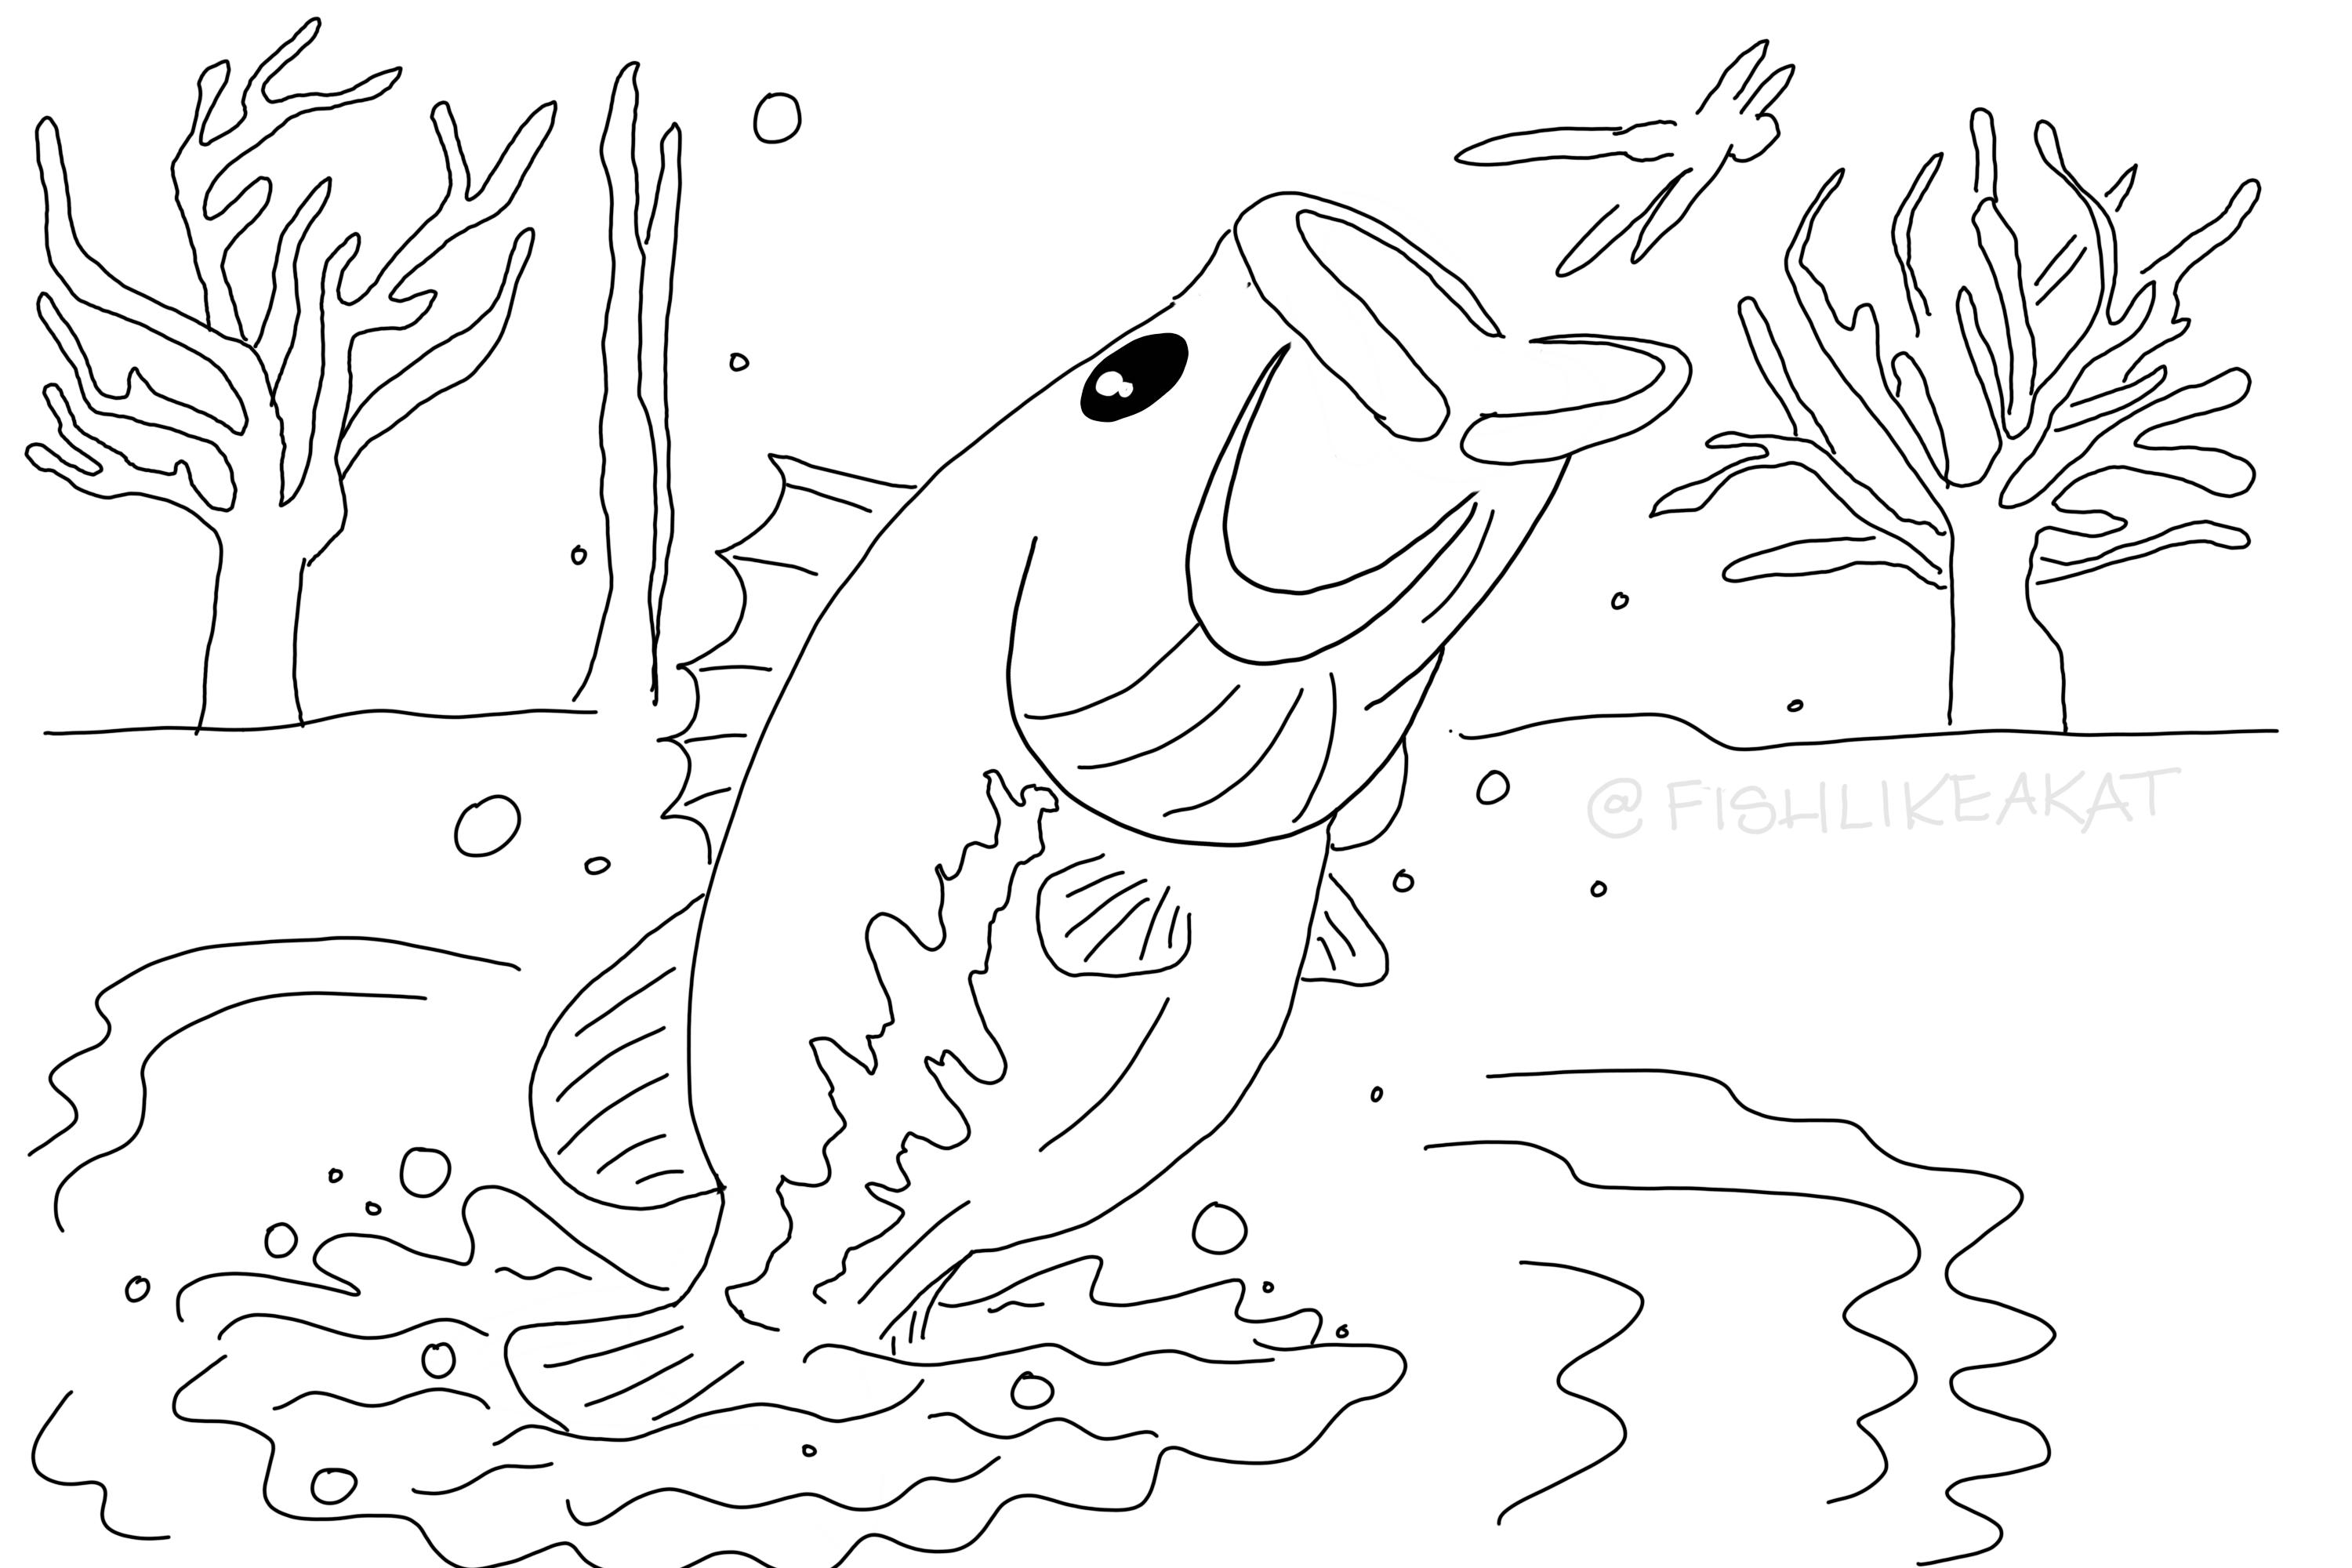 Coloring page with a largemouth bass jumping out of the water to eat a dragonfly